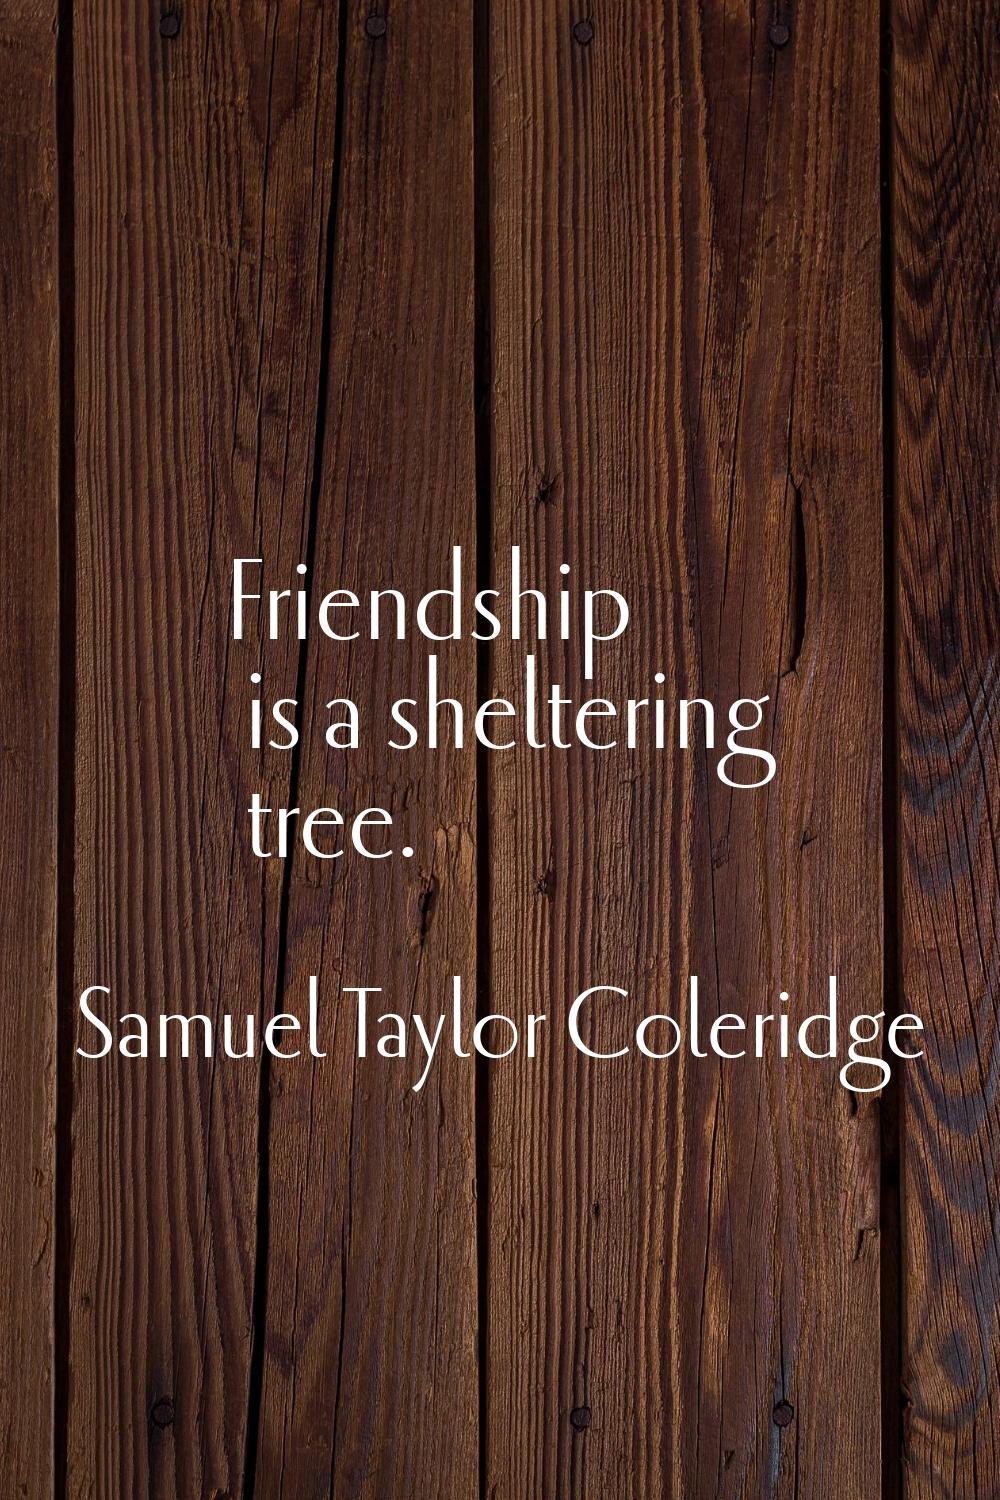 Friendship is a sheltering tree.